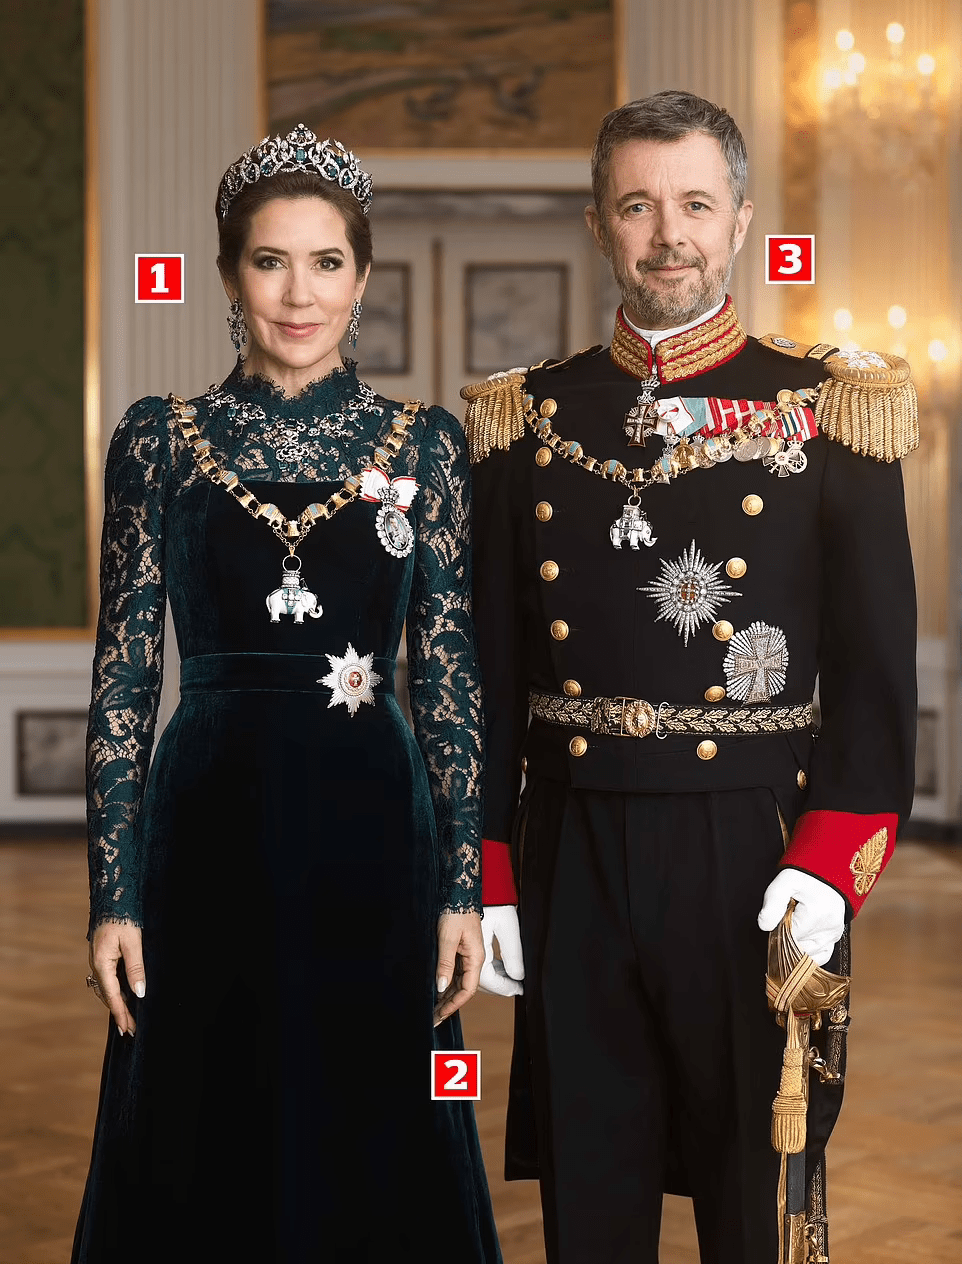 Two separate photos? King Frederick X of Denmark and his wife are also caught up in the Photoshop scandal